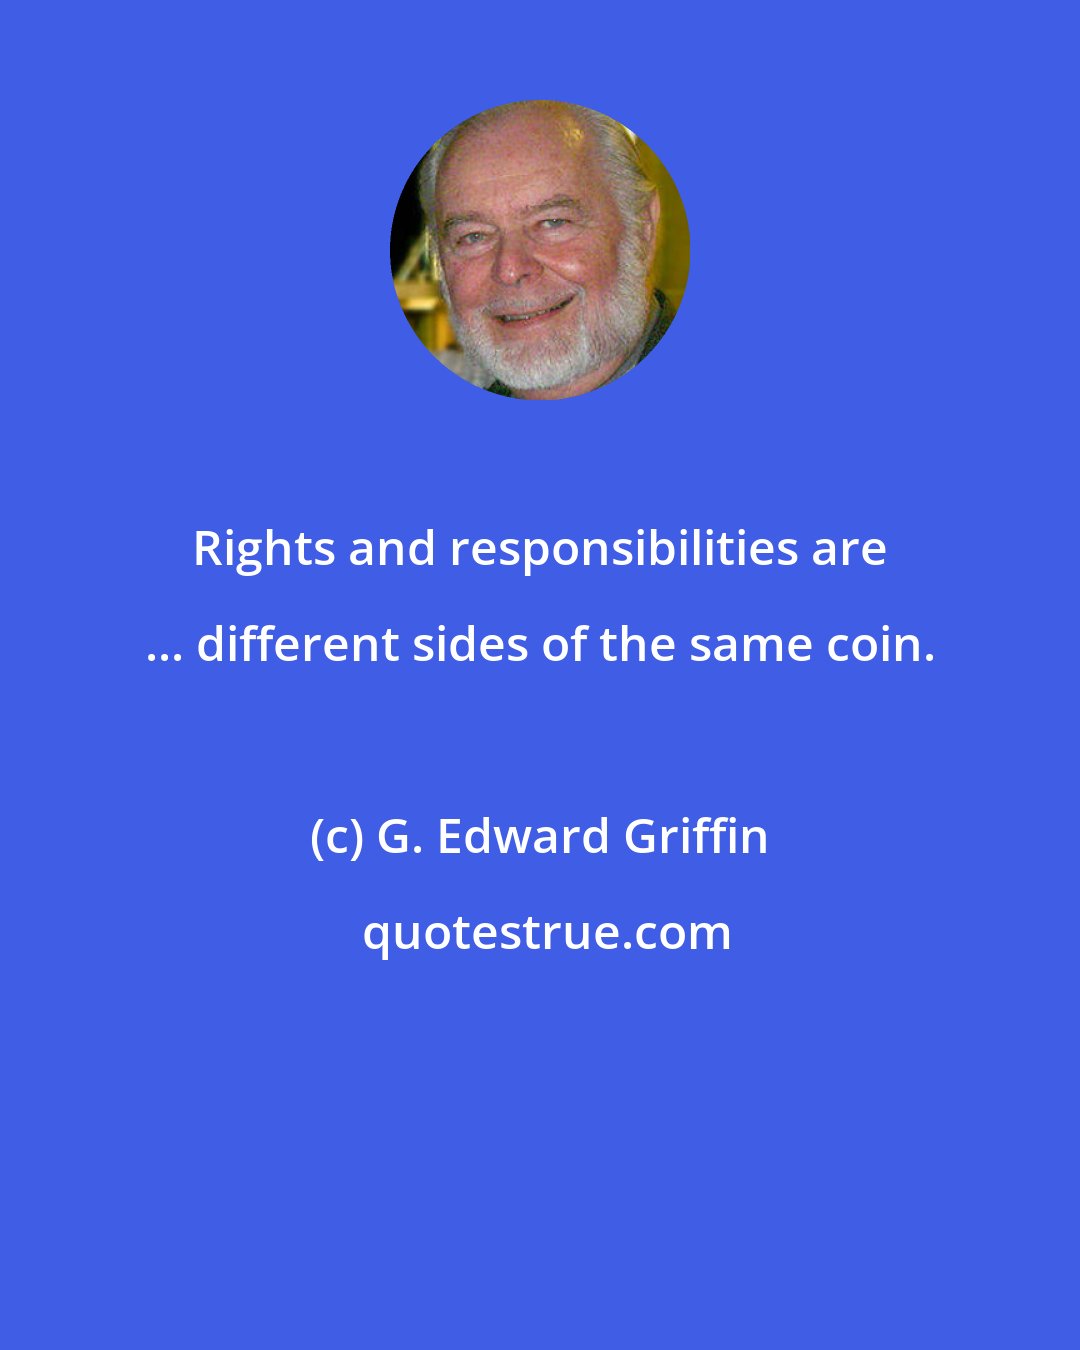 G. Edward Griffin: Rights and responsibilities are ... different sides of the same coin.